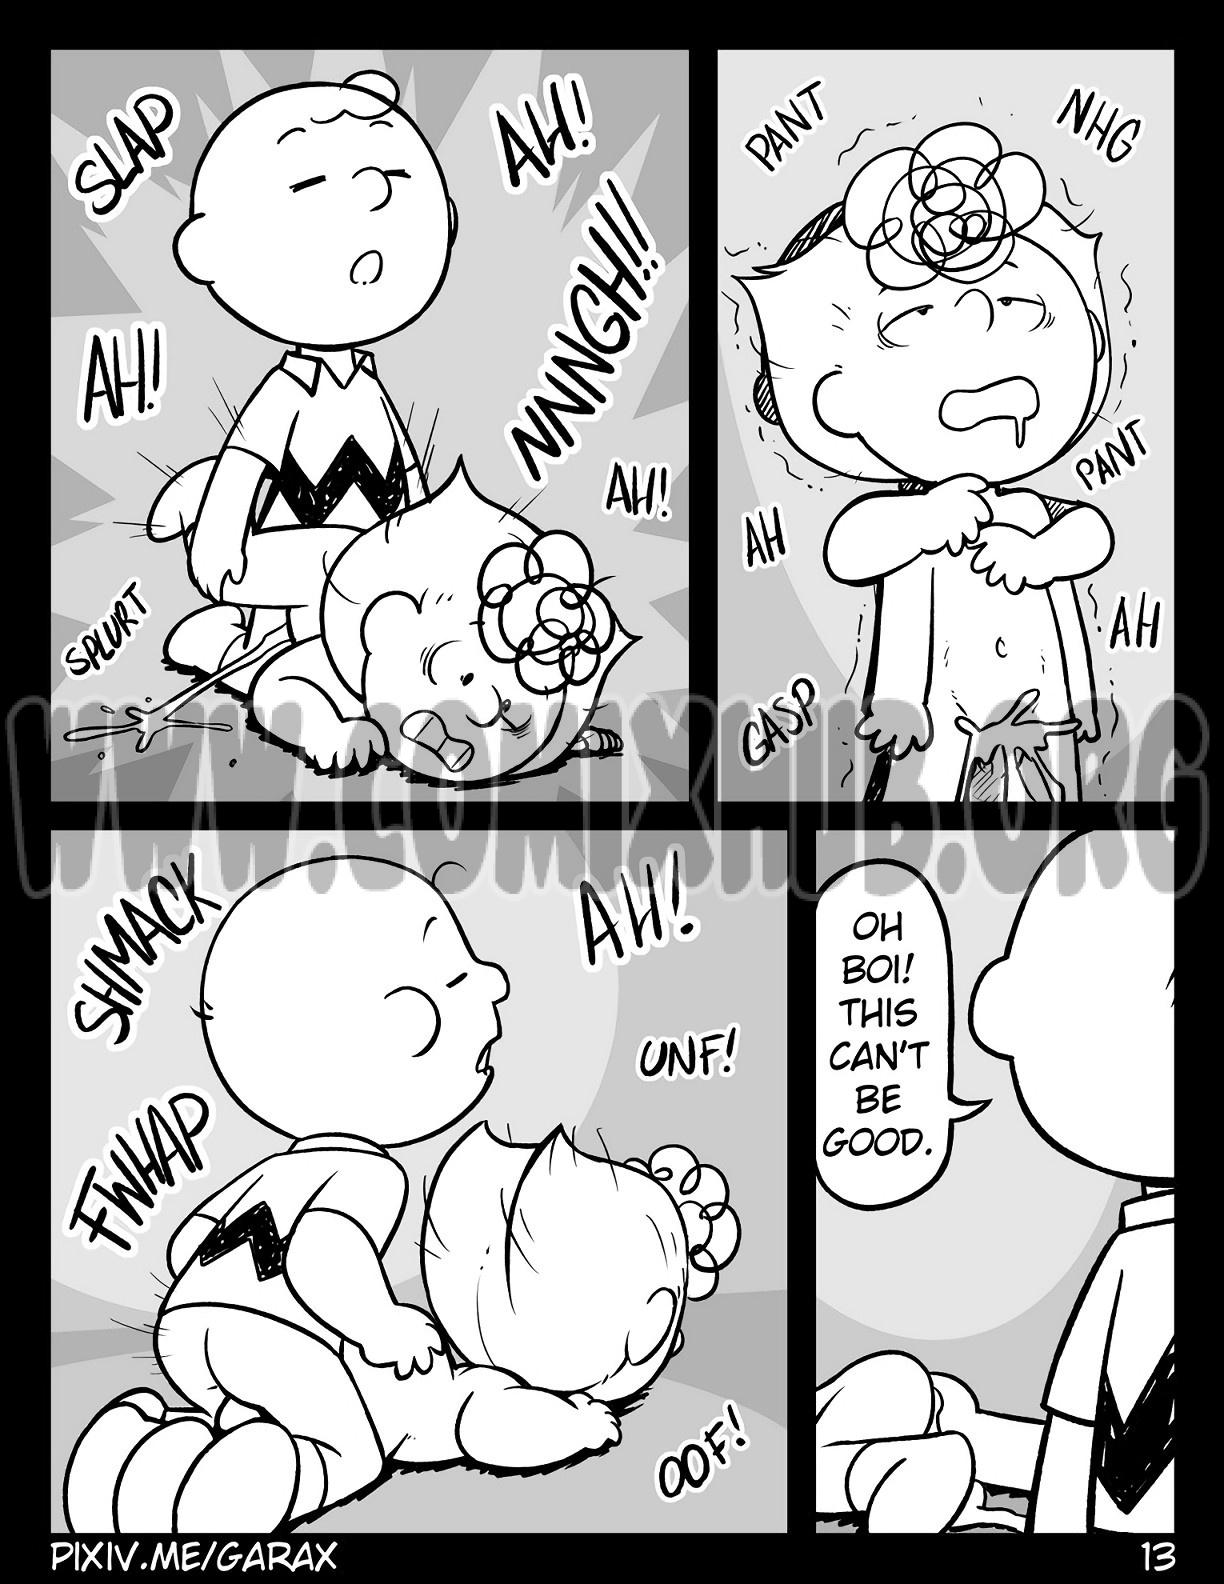 You are a (Sister) Fucker, Charlie Brown porn comics Oral sex, Blowjob, Cum Swallow, Deepthroat, Lolicon